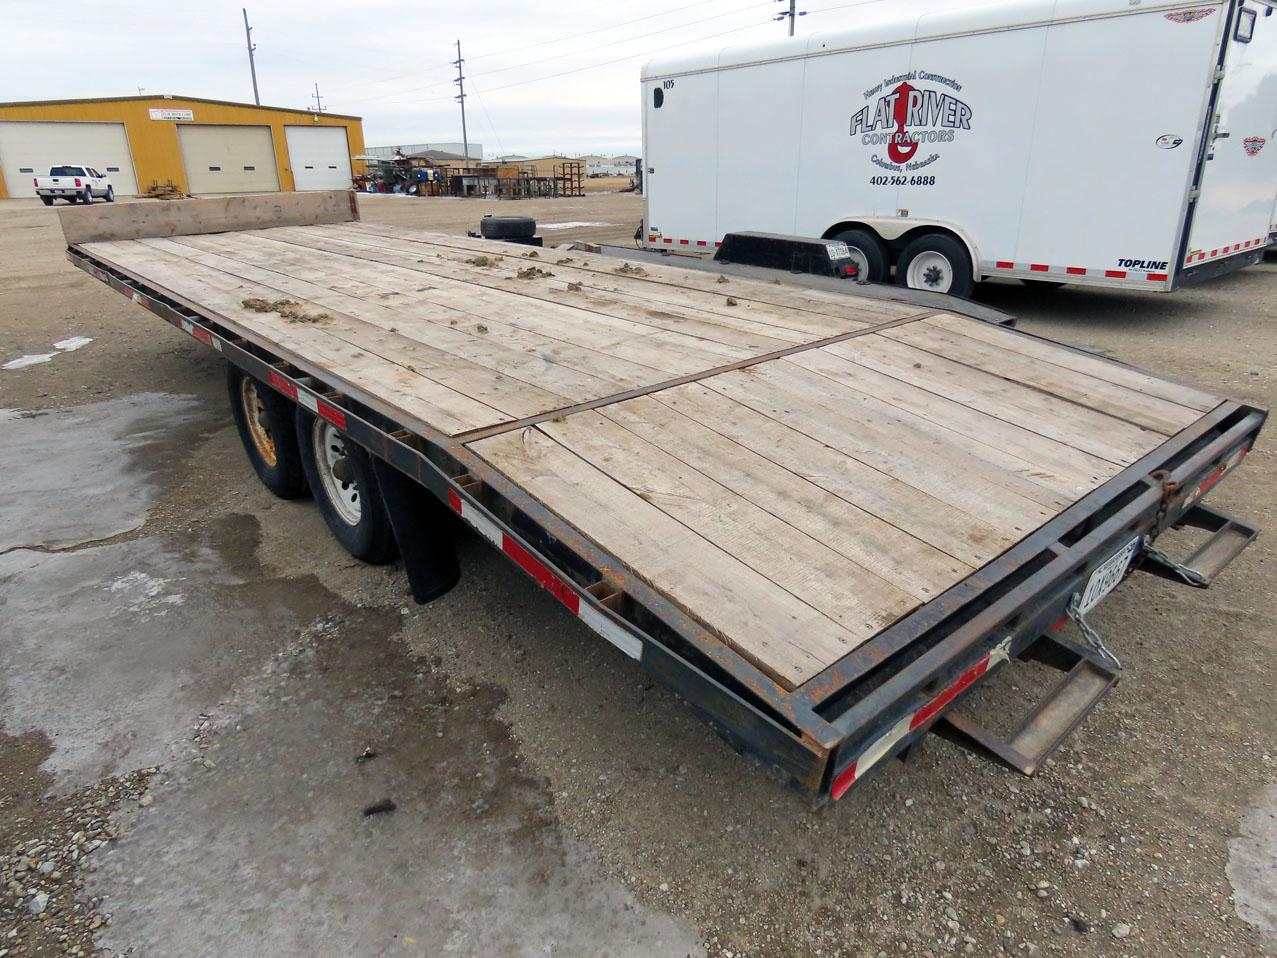 2019 Flat River 23’ Tandem Axle Flatbed Tag Trailer, VIN#1F9PA400171FRC010,